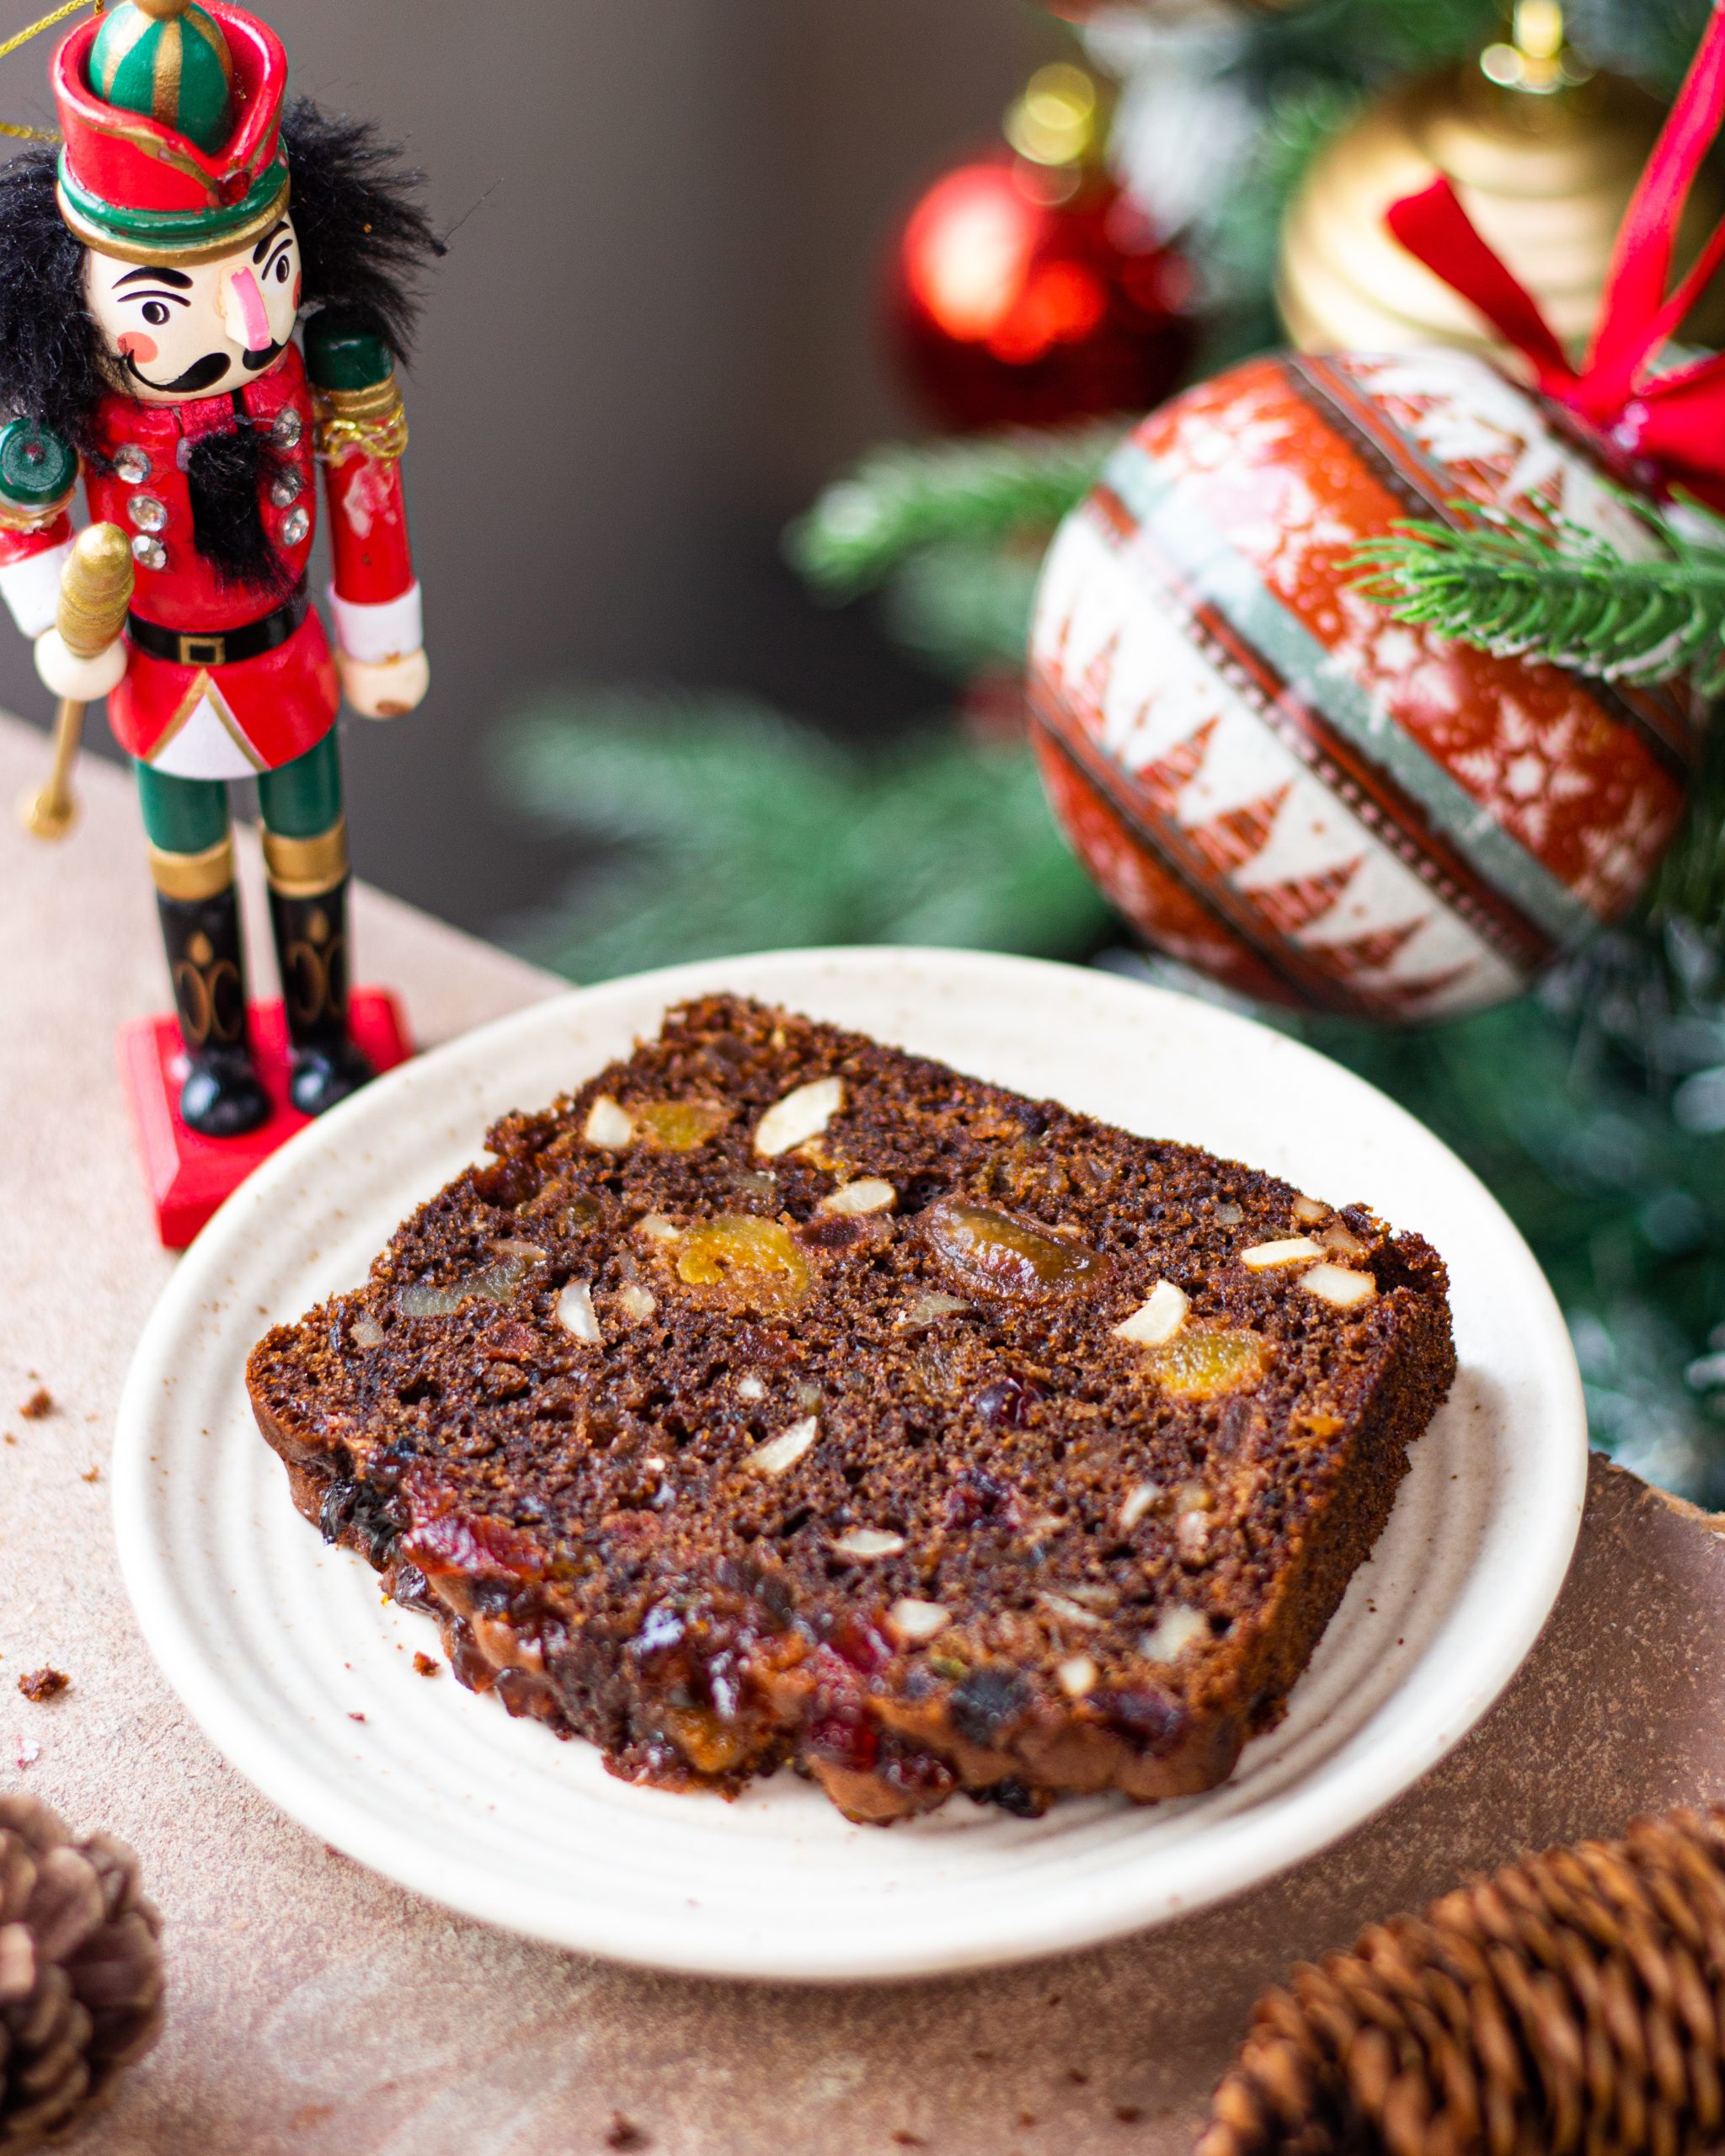 Popular Christmas Cake Recipes: 10 most popular cakes for Christmas | Times  of India